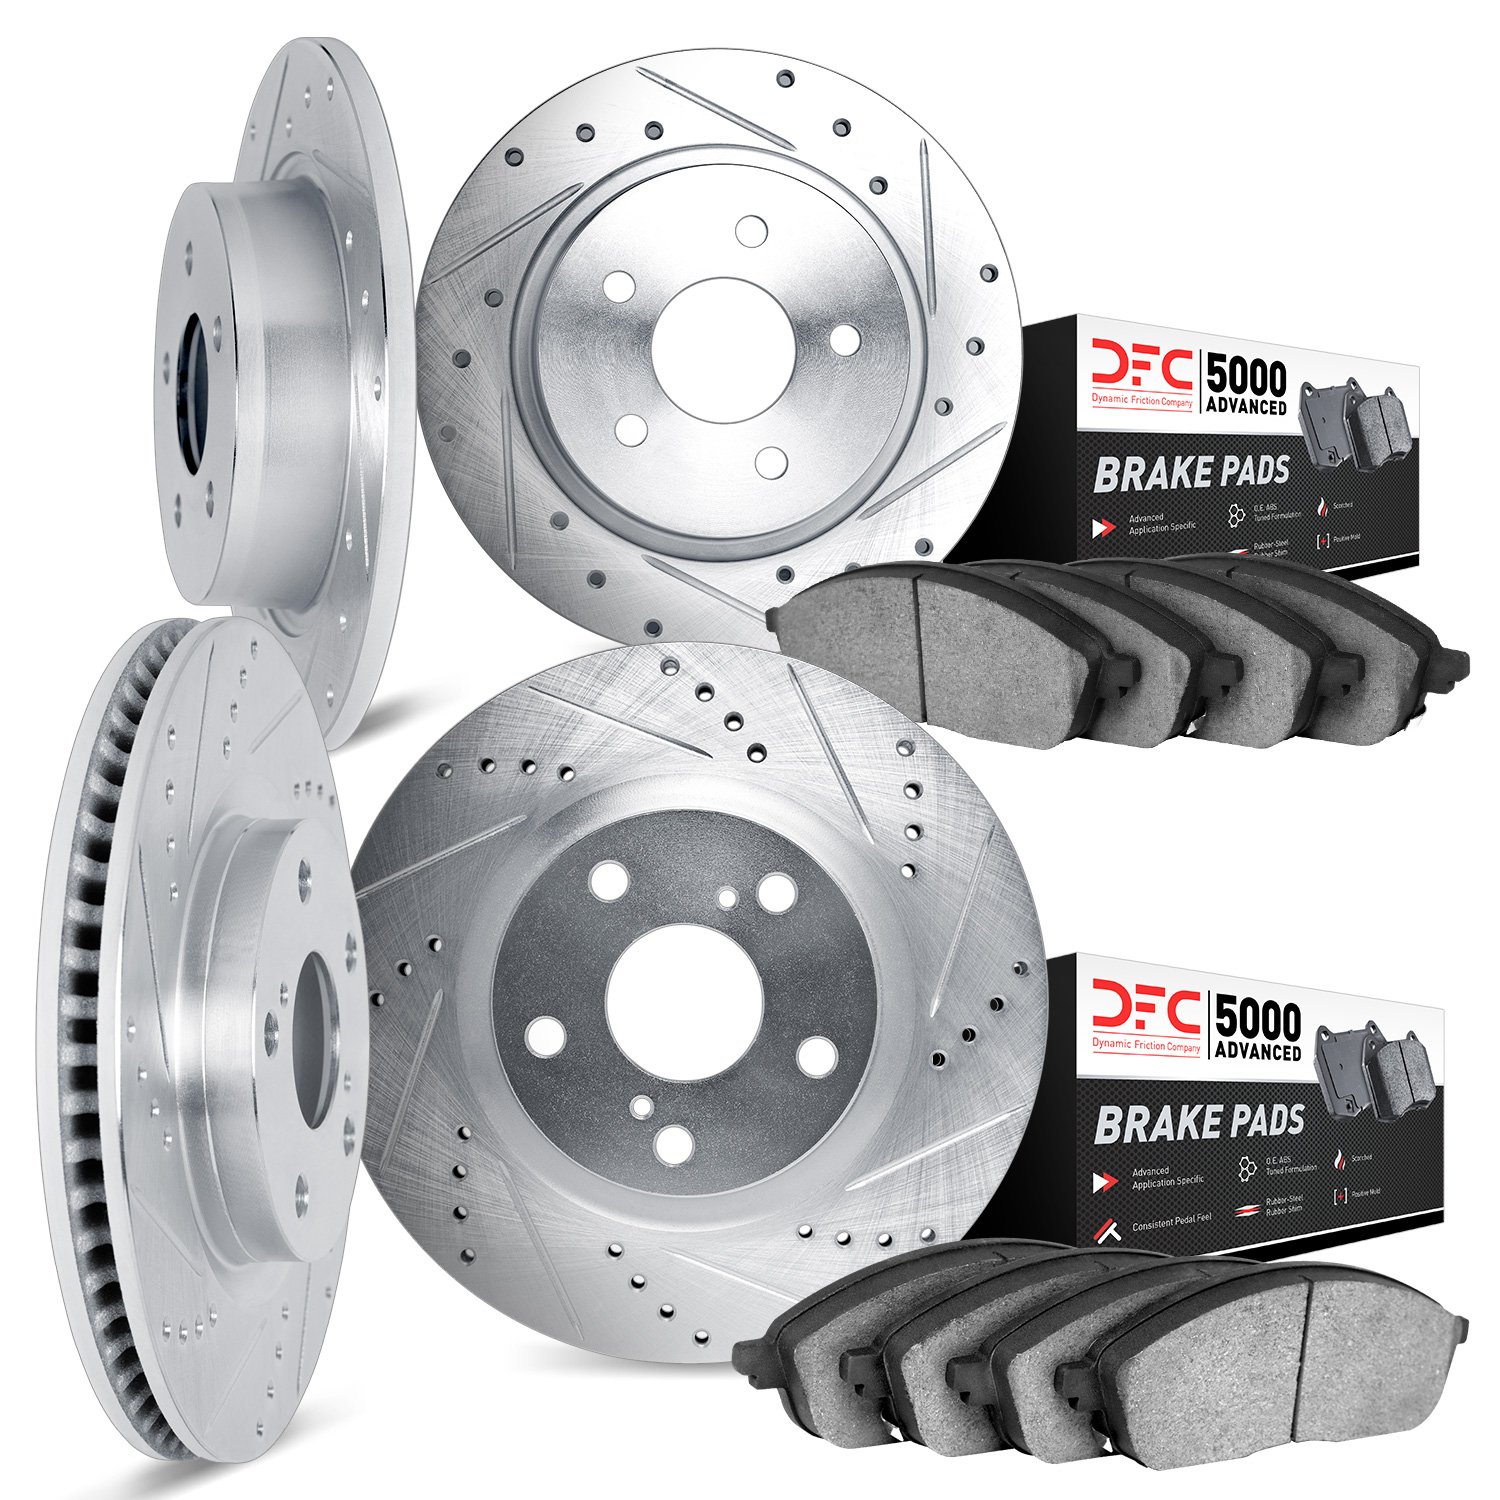 7504-31023 Drilled/Slotted Brake Rotors w/5000 Advanced Brake Pads Kit [Silver], 2007-2012 BMW, Position: Front and Rear